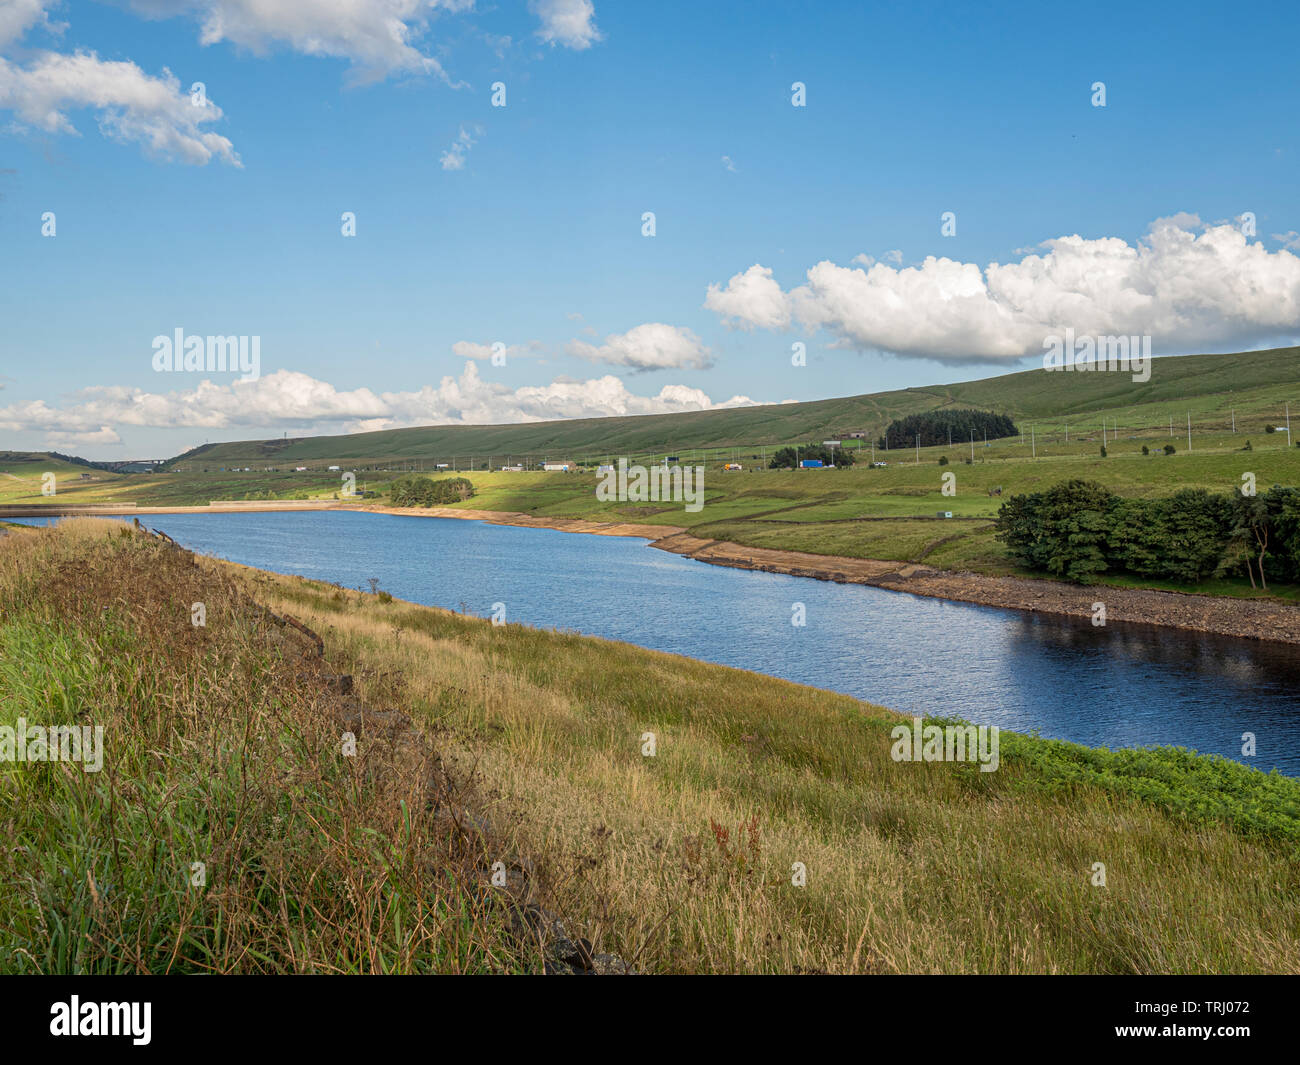 Booth Wood Reservoir with M62 Motorway in background, West Yorkshire, UK. Stock Photo